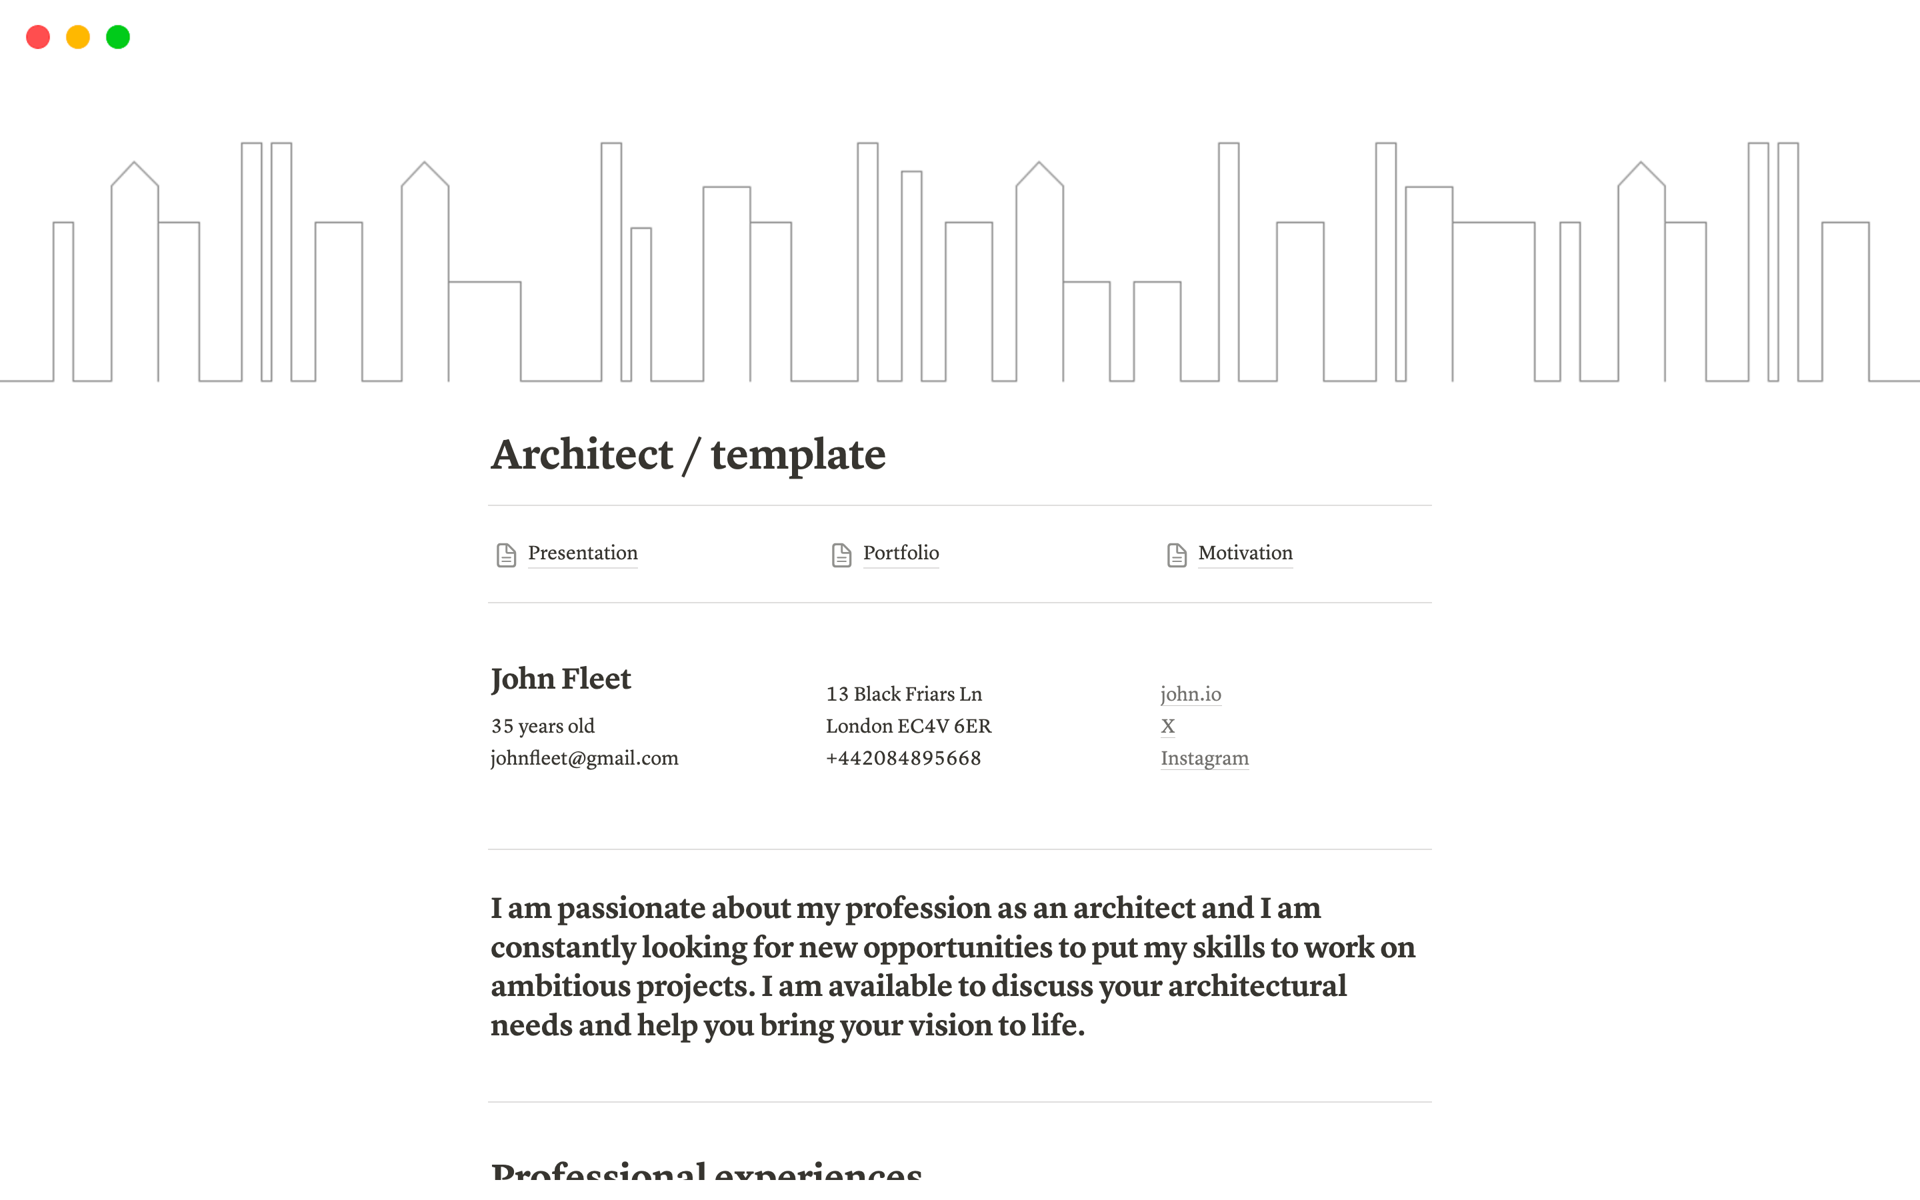 Architect Notion Template Resume CV with a special architect cover, a menu with 3 pages description like presentation, portfolio and motivation.